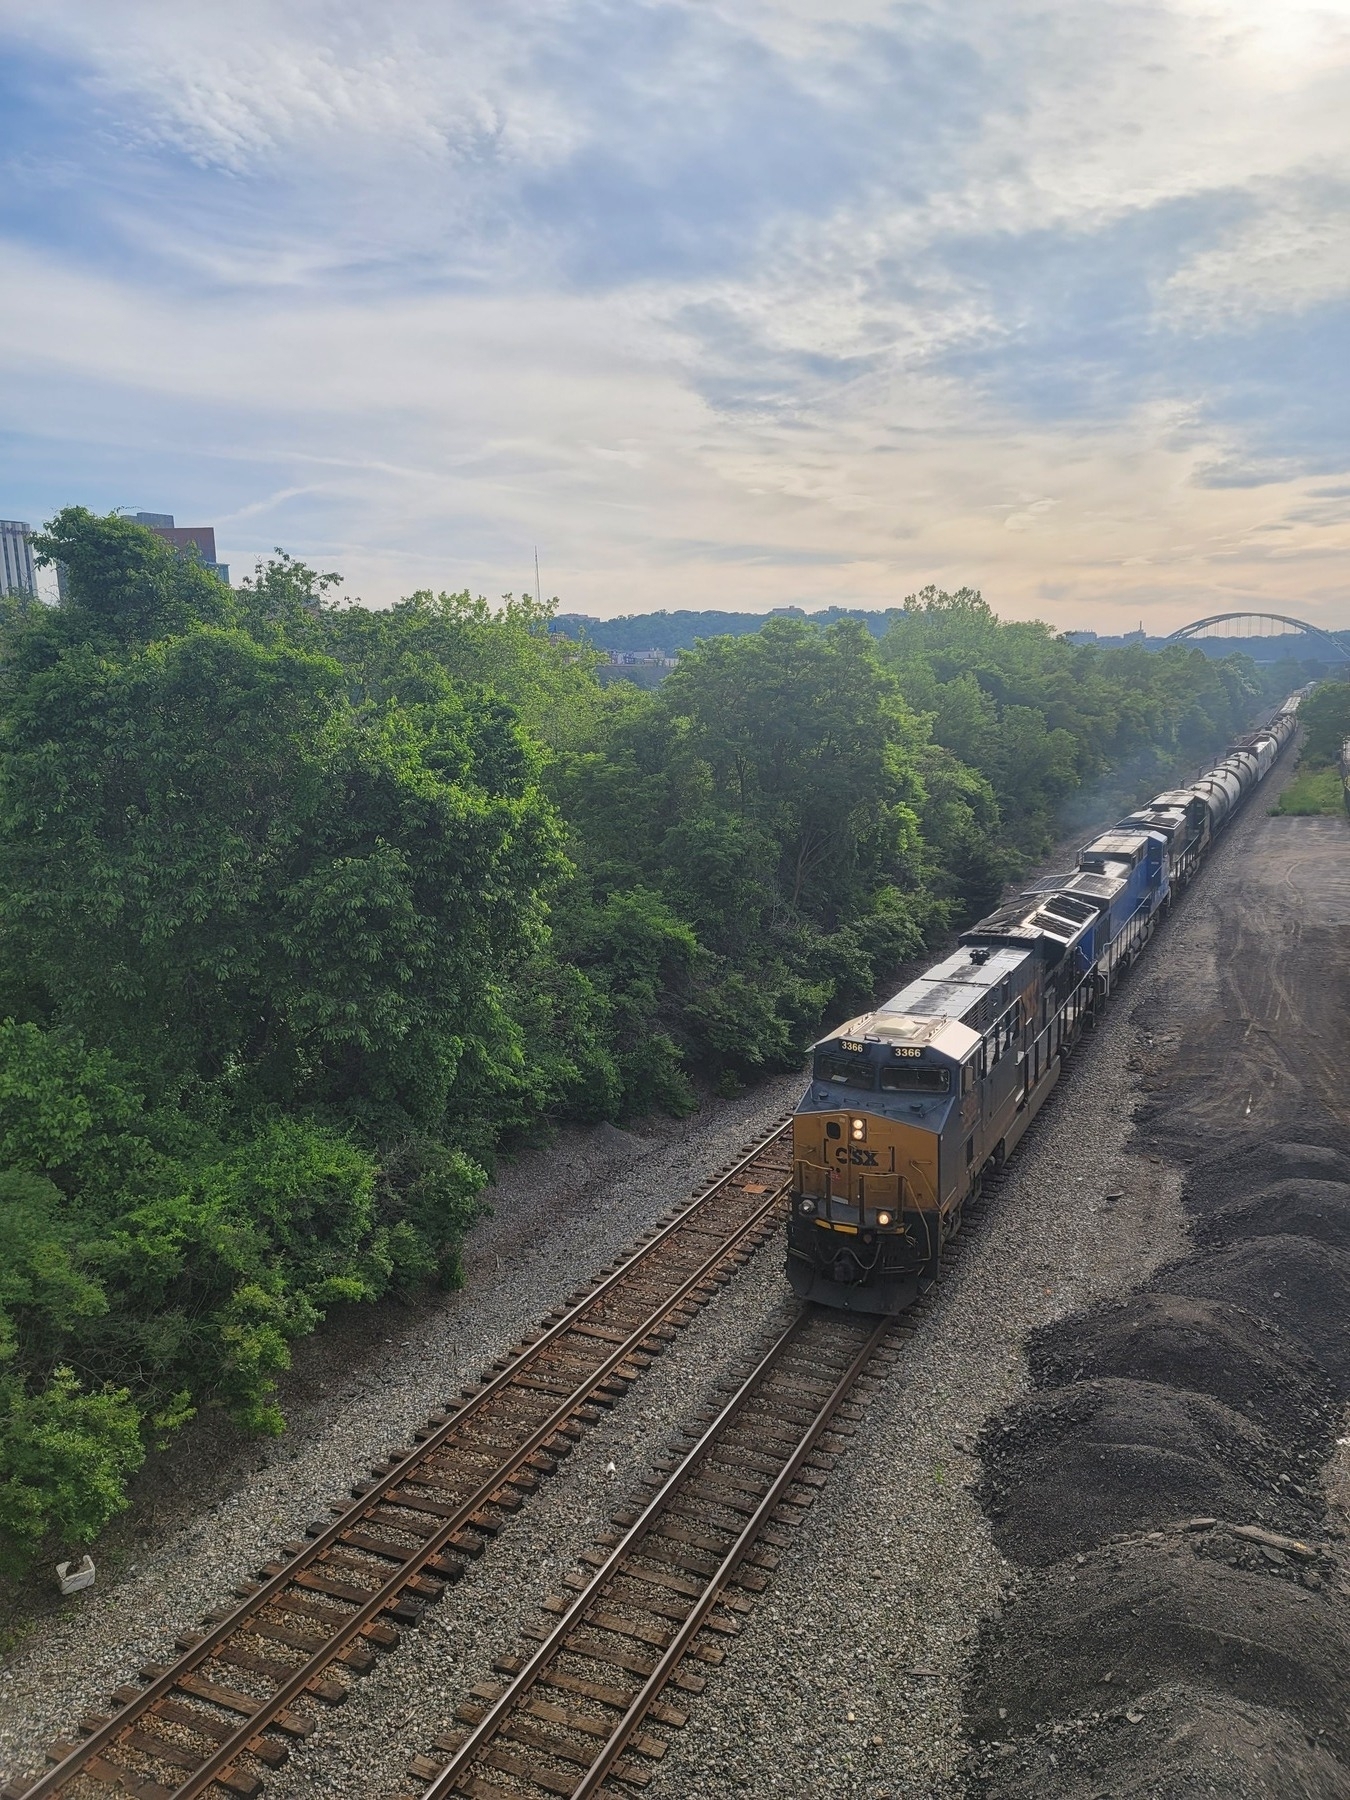 incoming train on tracks seen from above headed towards bottom left of image; green trees on the left and piles of dirt on the right